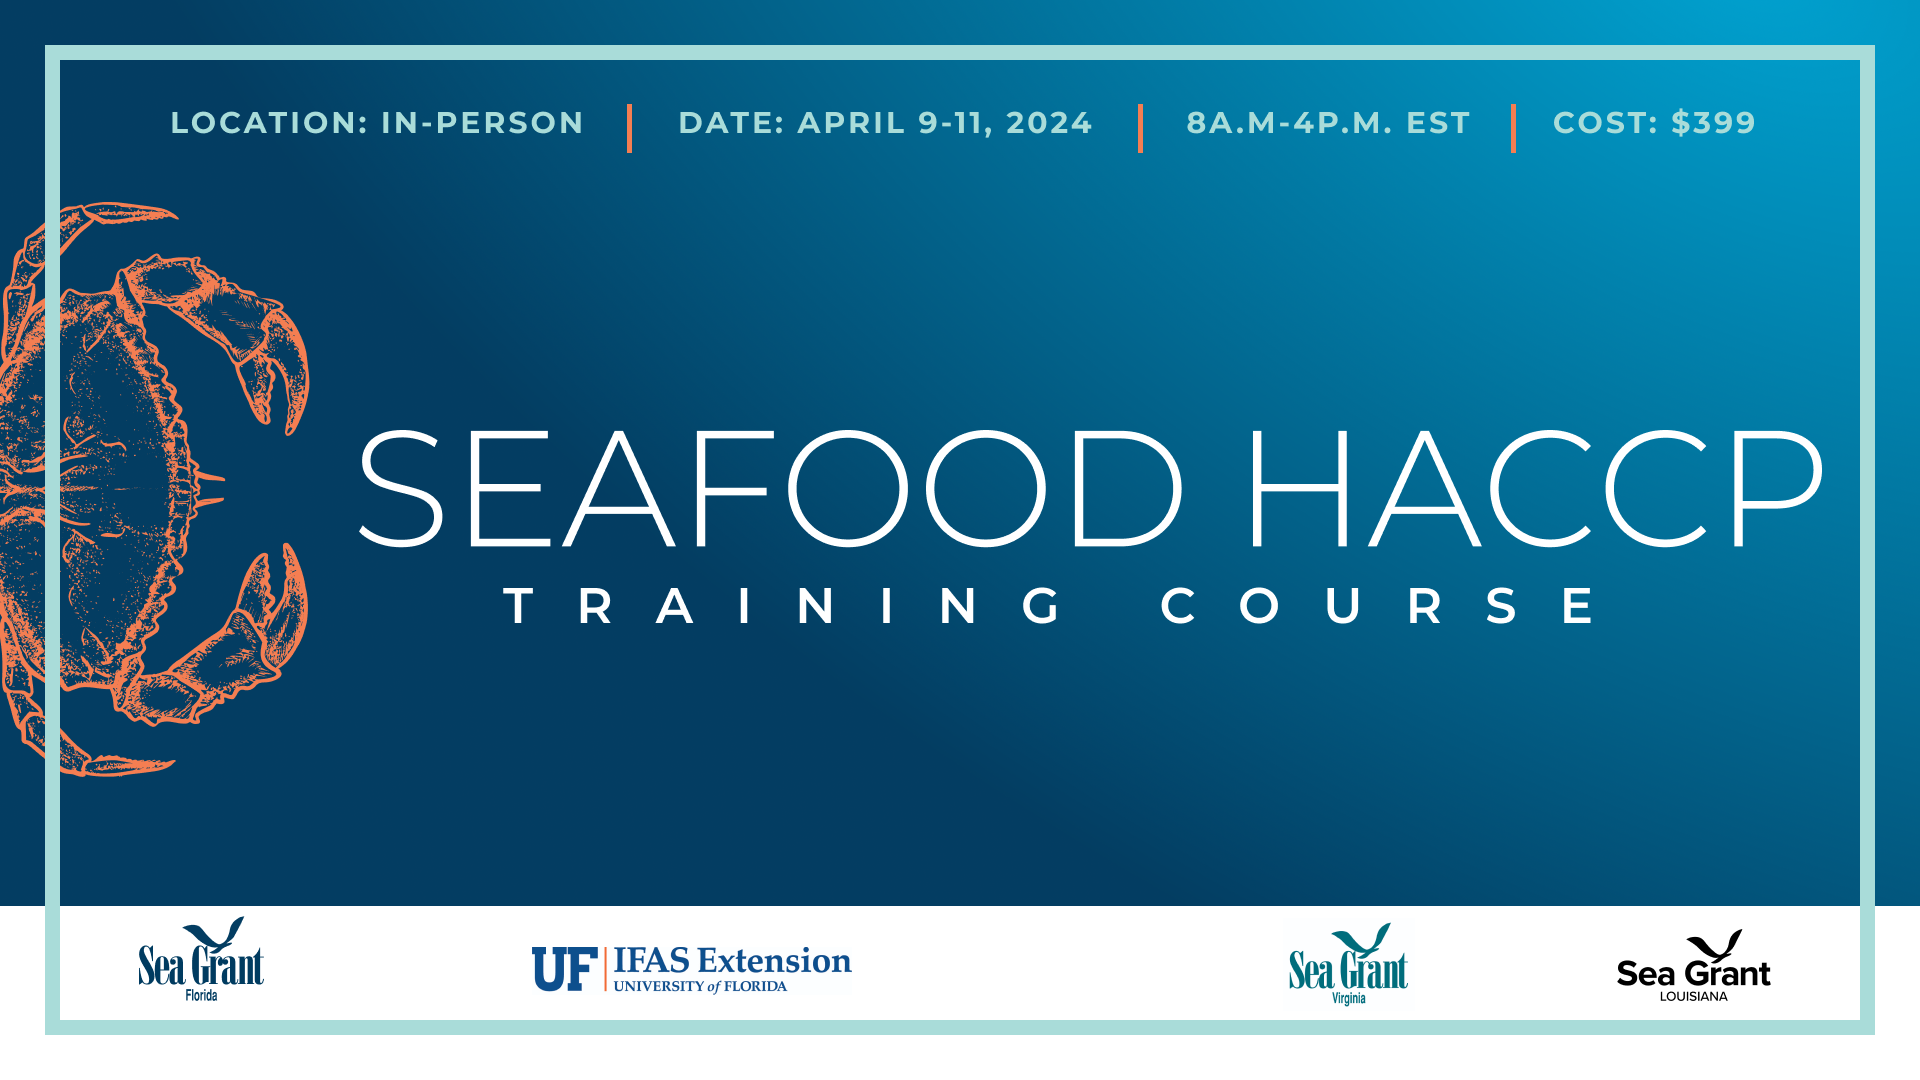 In-Person Basic Seafood HACCP Training